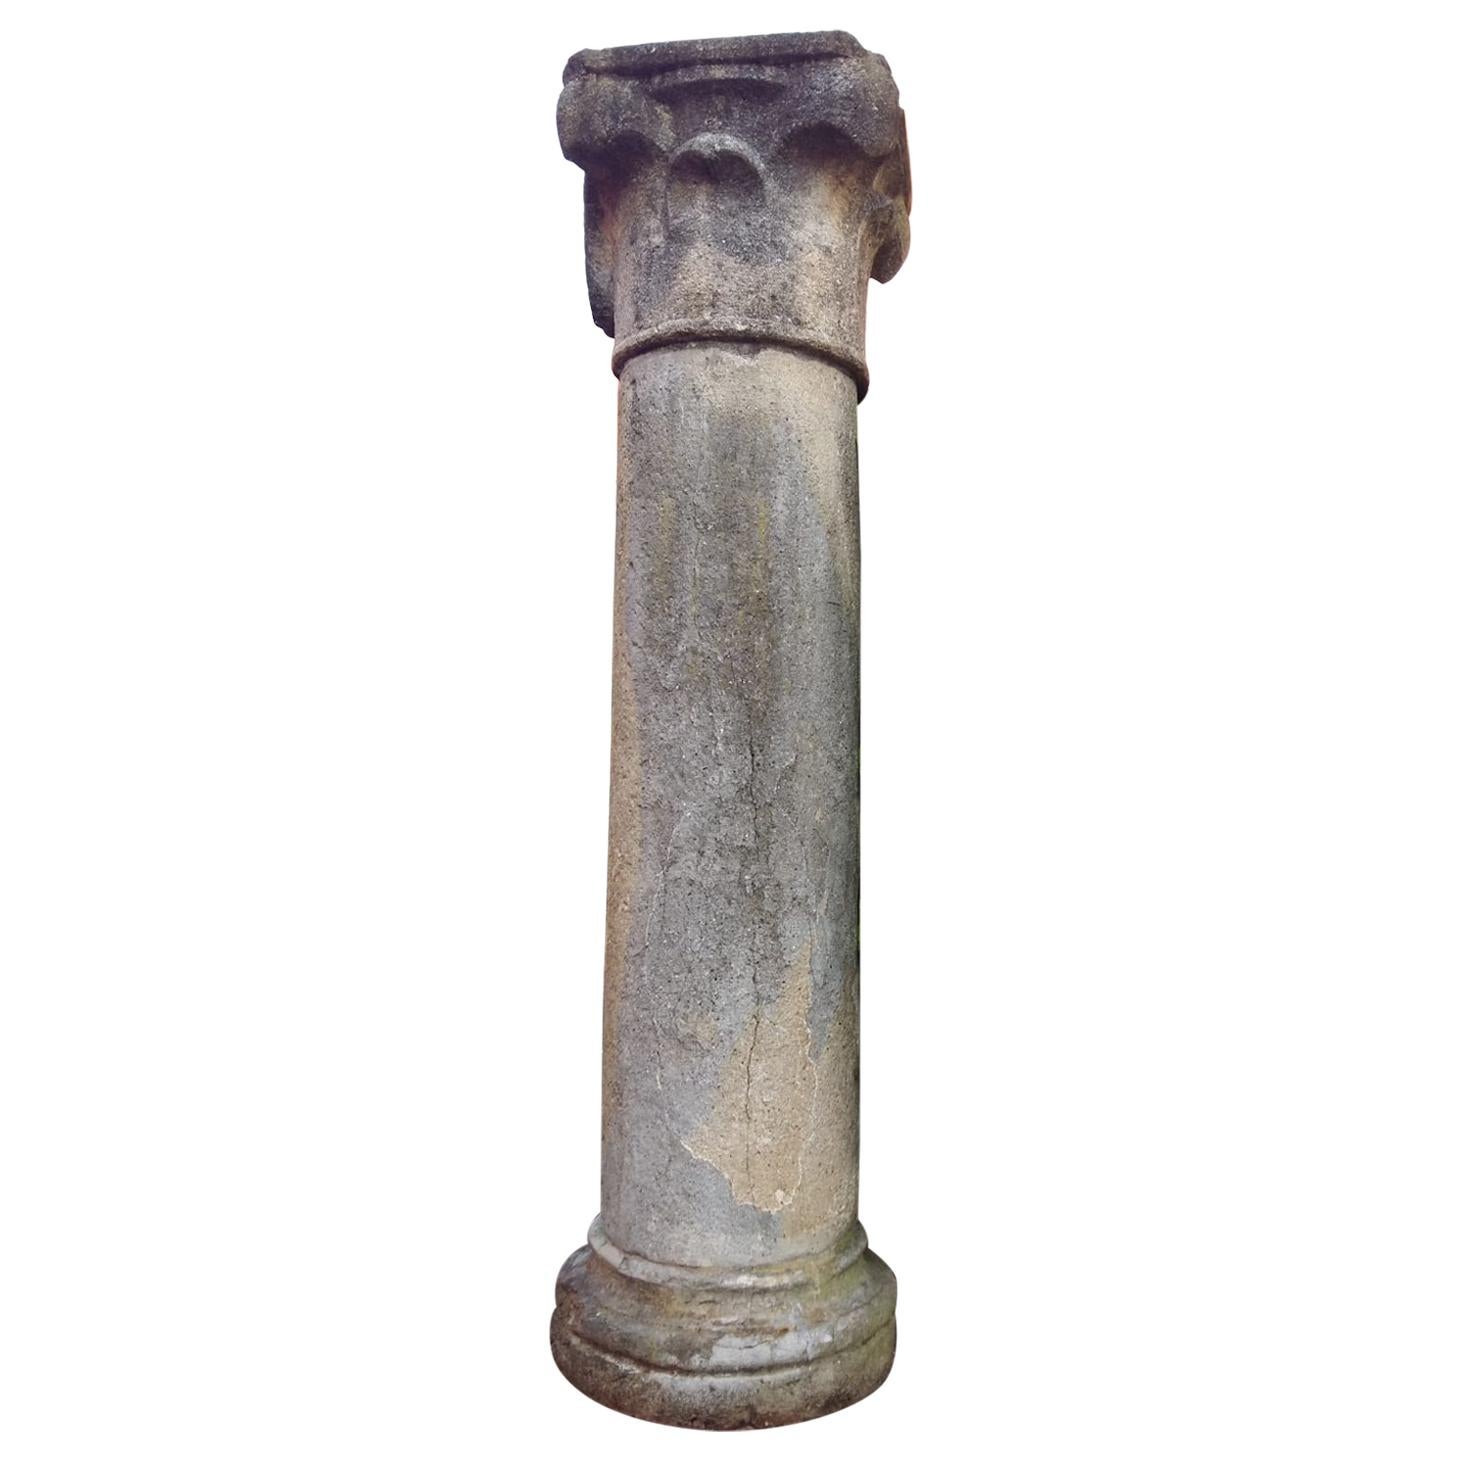 13th Century Italian Rare Antique Medieval Hand Carved Grey Stone Large Column